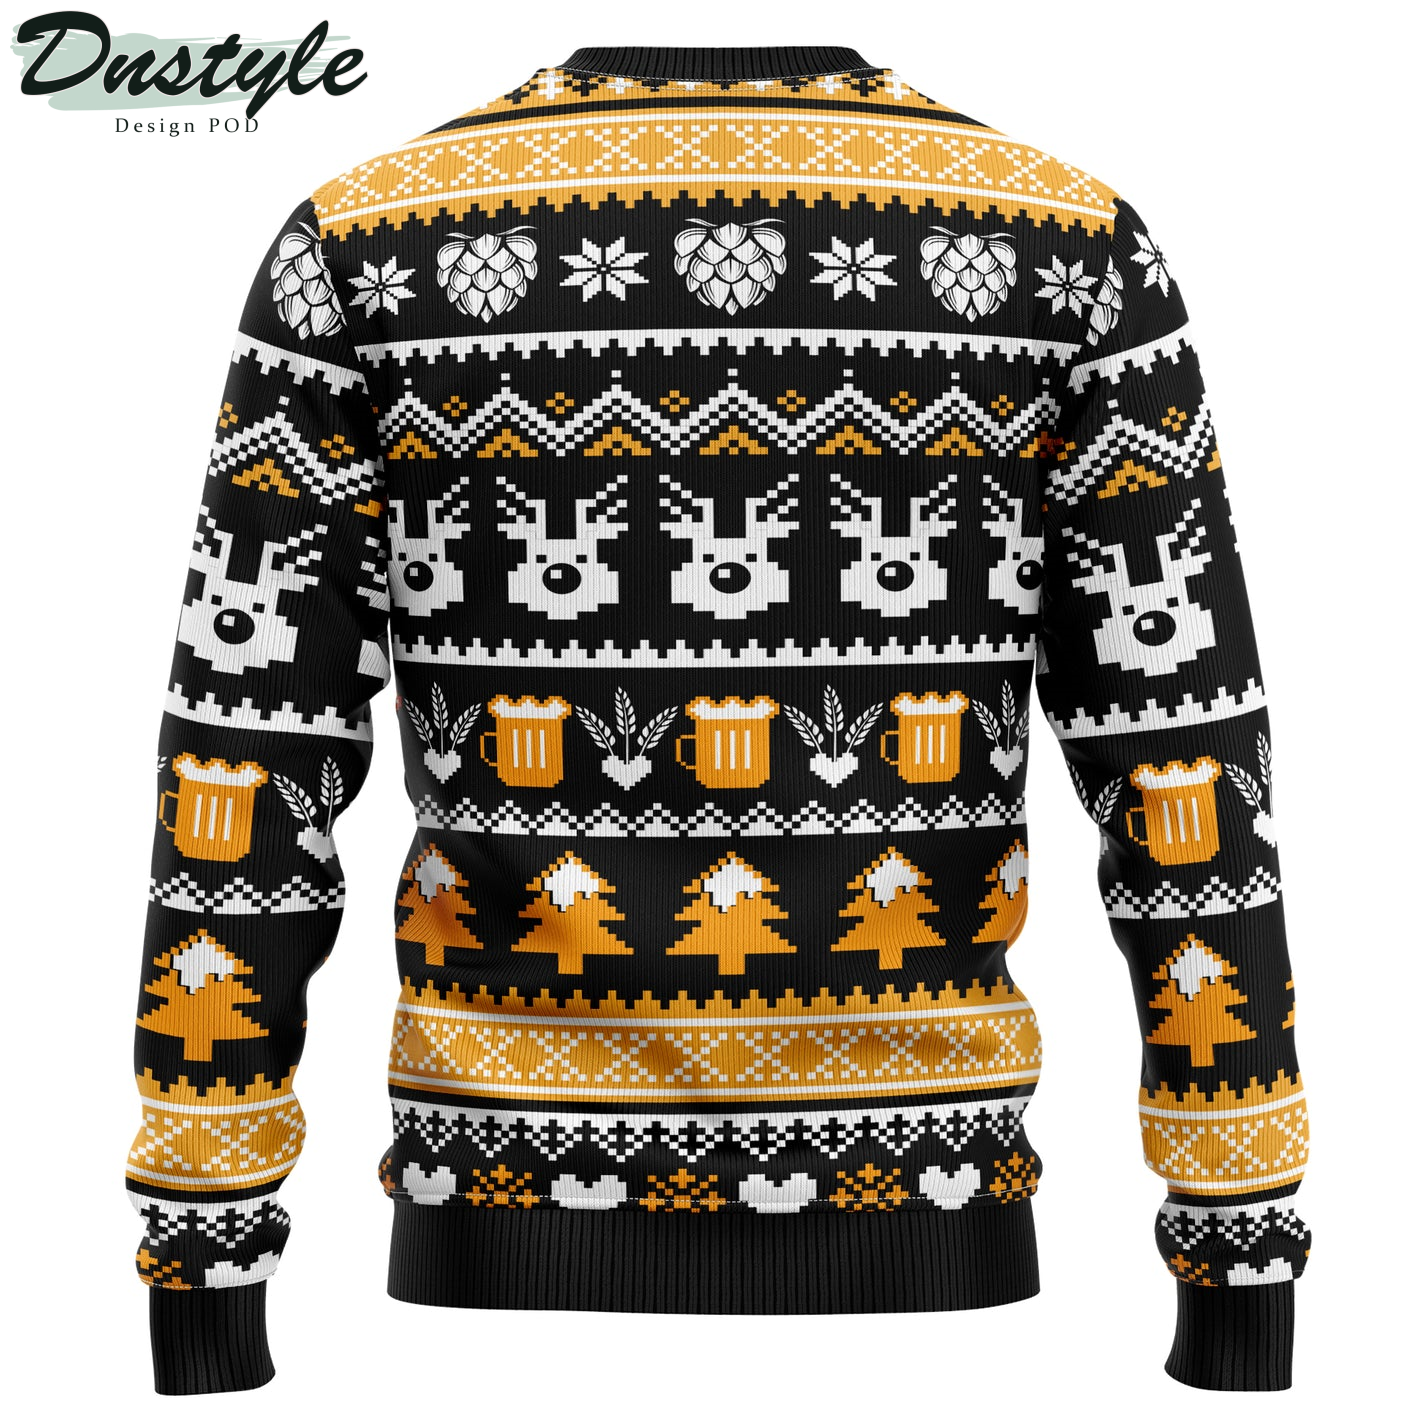 Wonderful Time For A Beer Ugly Christmas Sweater